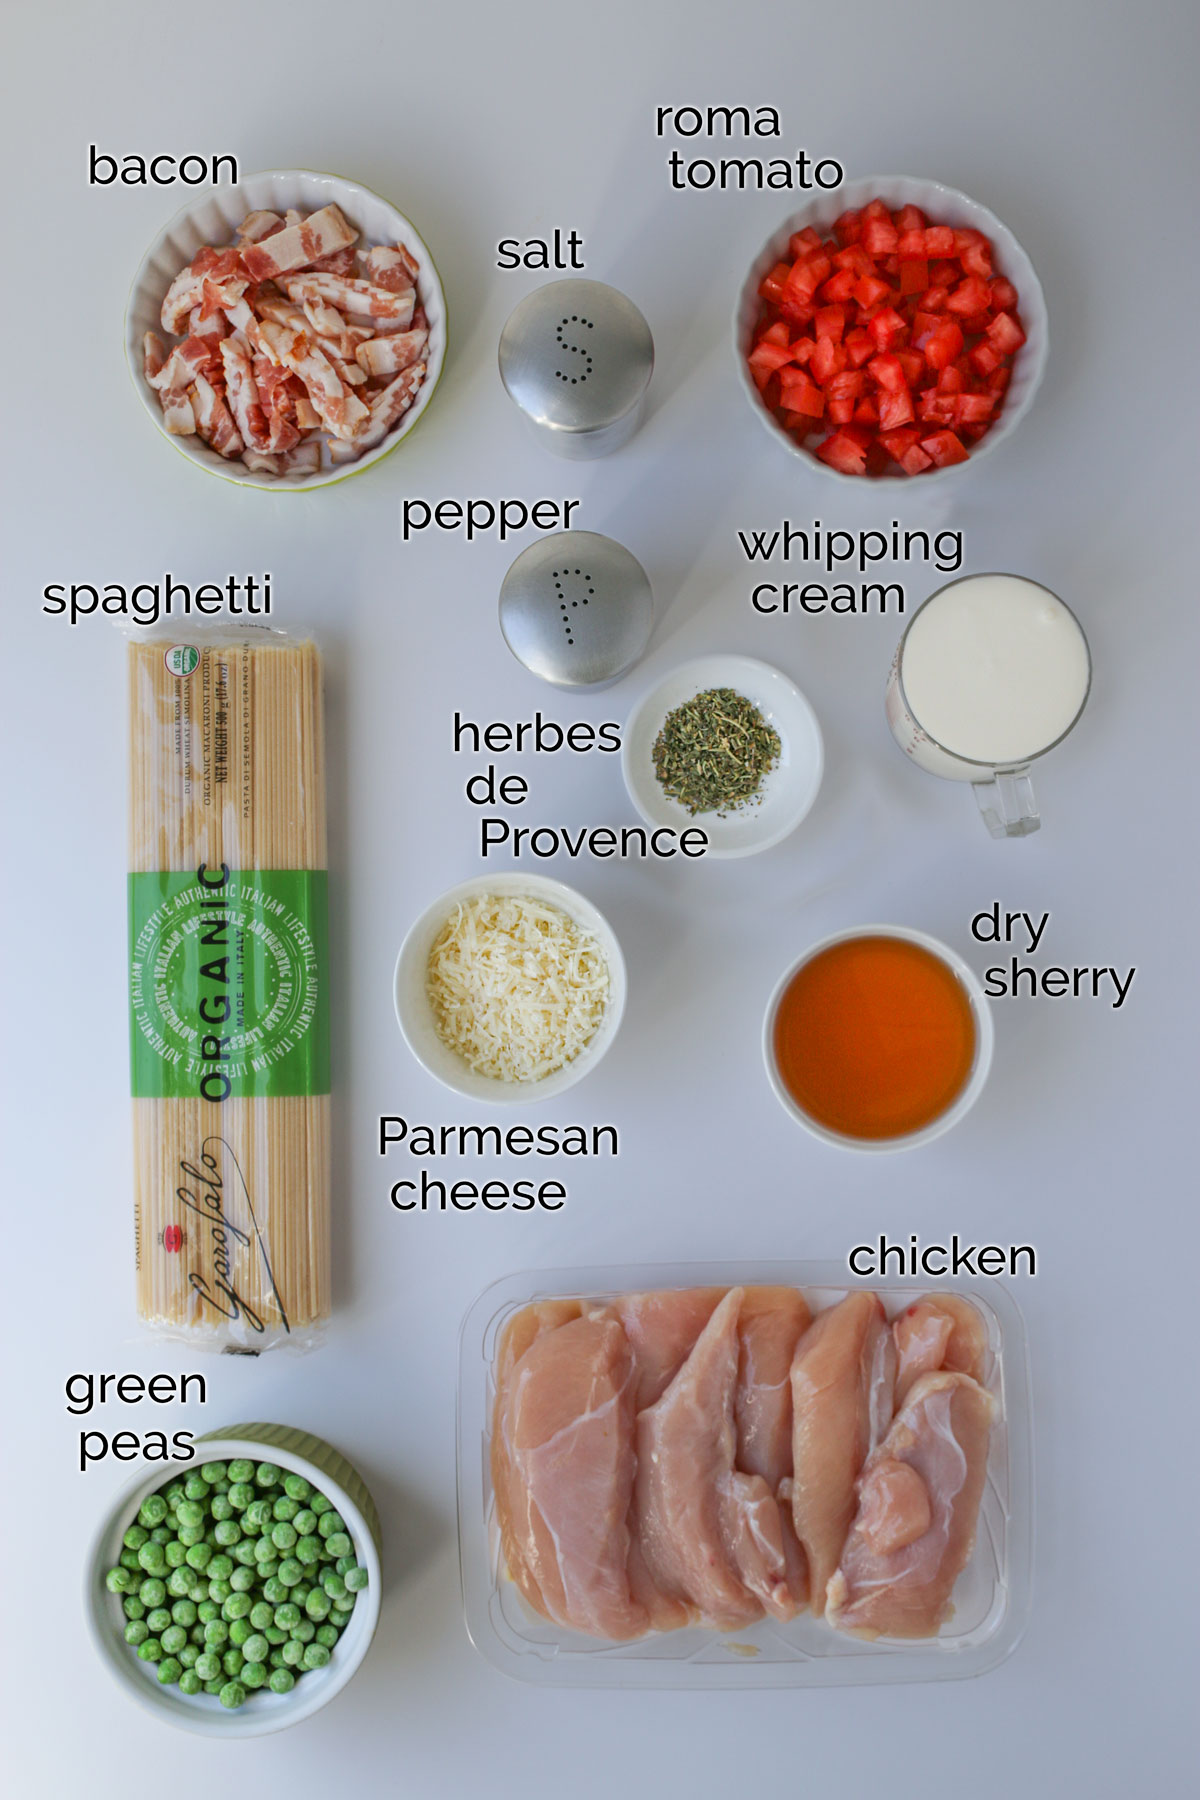 ingredients for creamy chicken and bacon pasta laid out on white table.